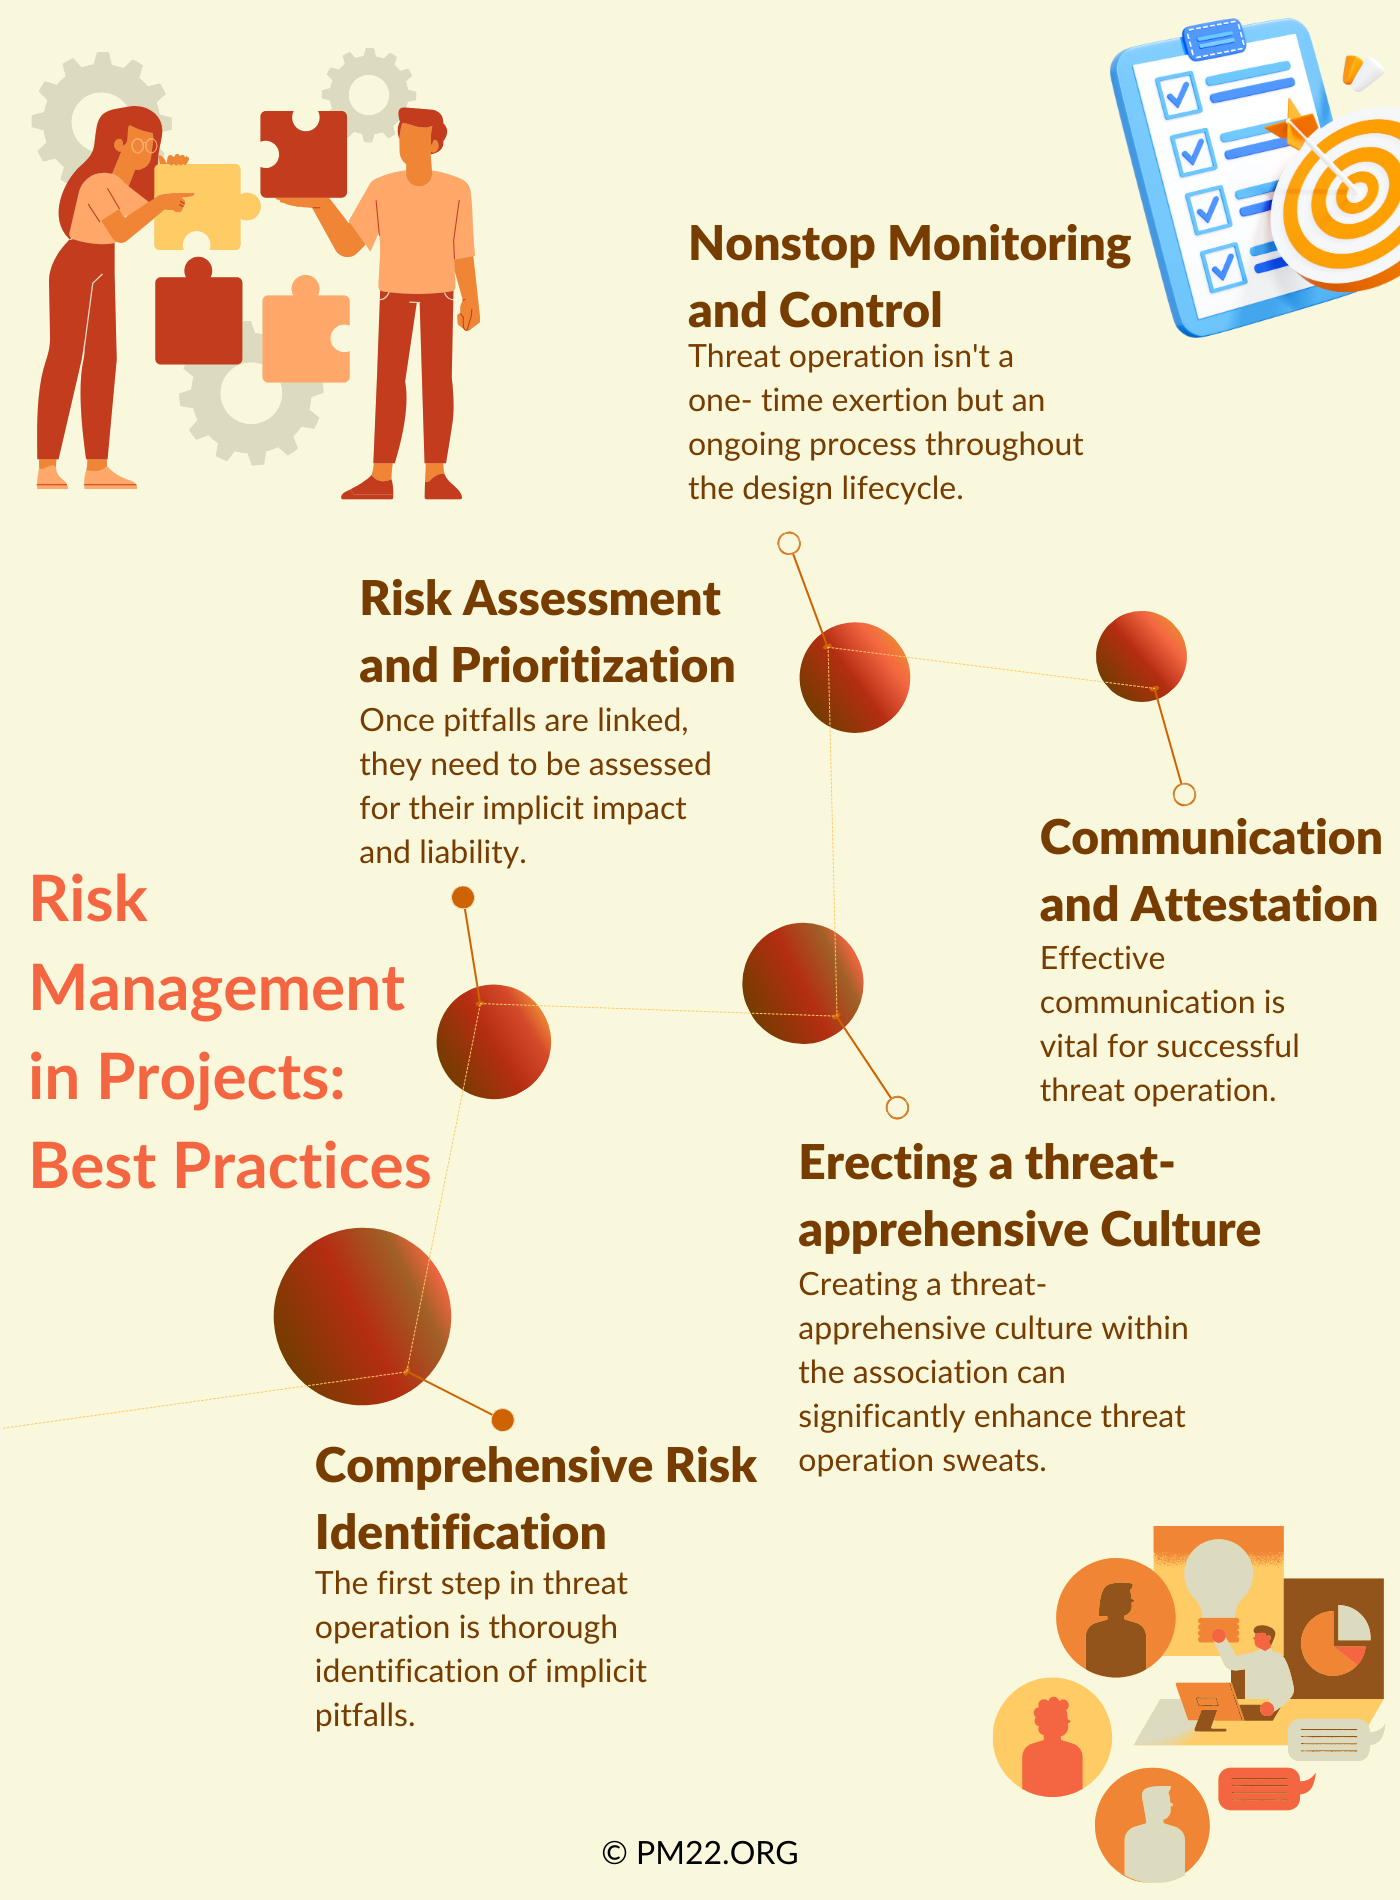 Risk Management in Projects: Best Practices